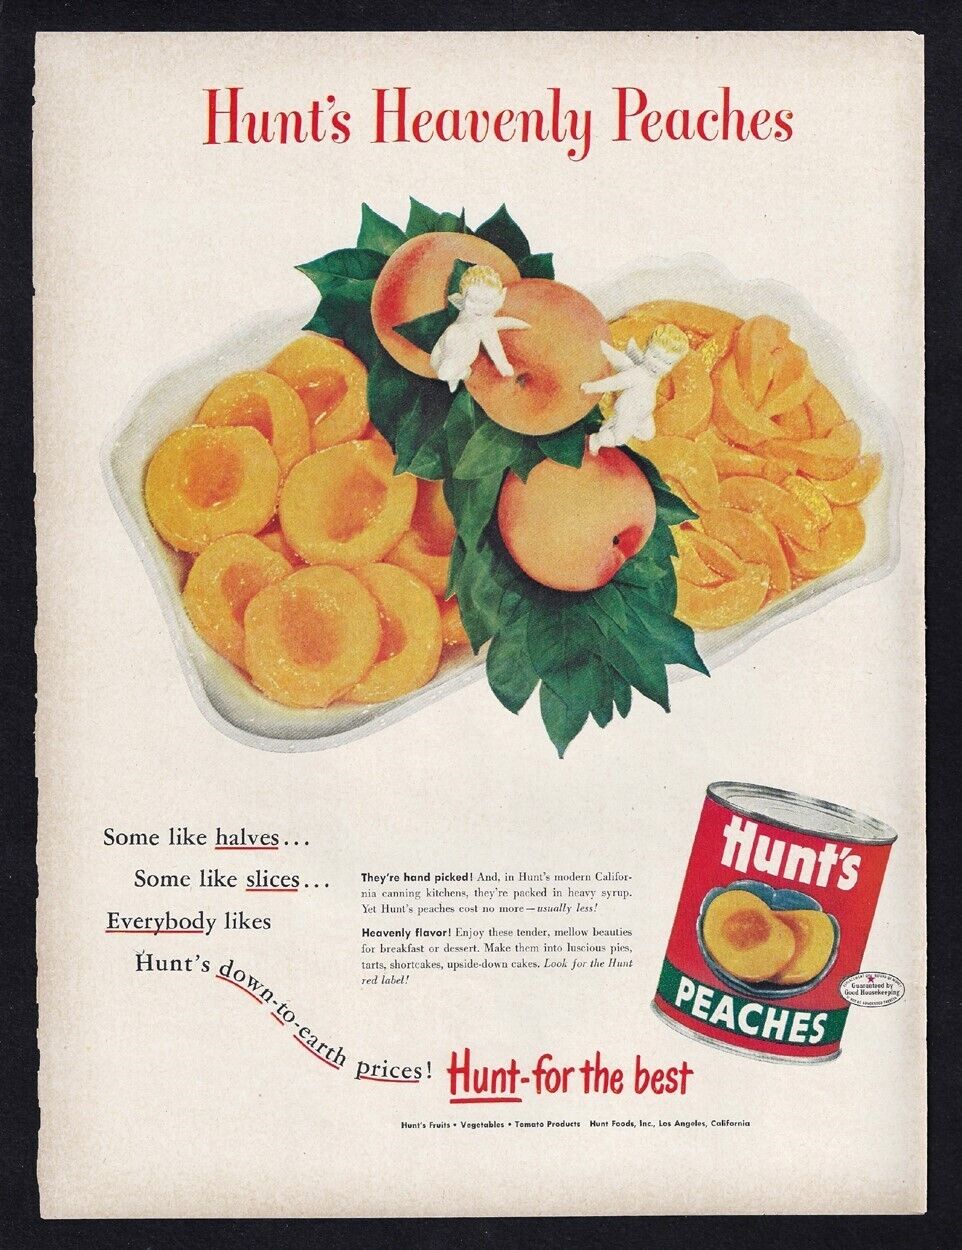 Vintage 1948 Hunt's "heavenly Peaches" Print Ad "hunt For The Best"